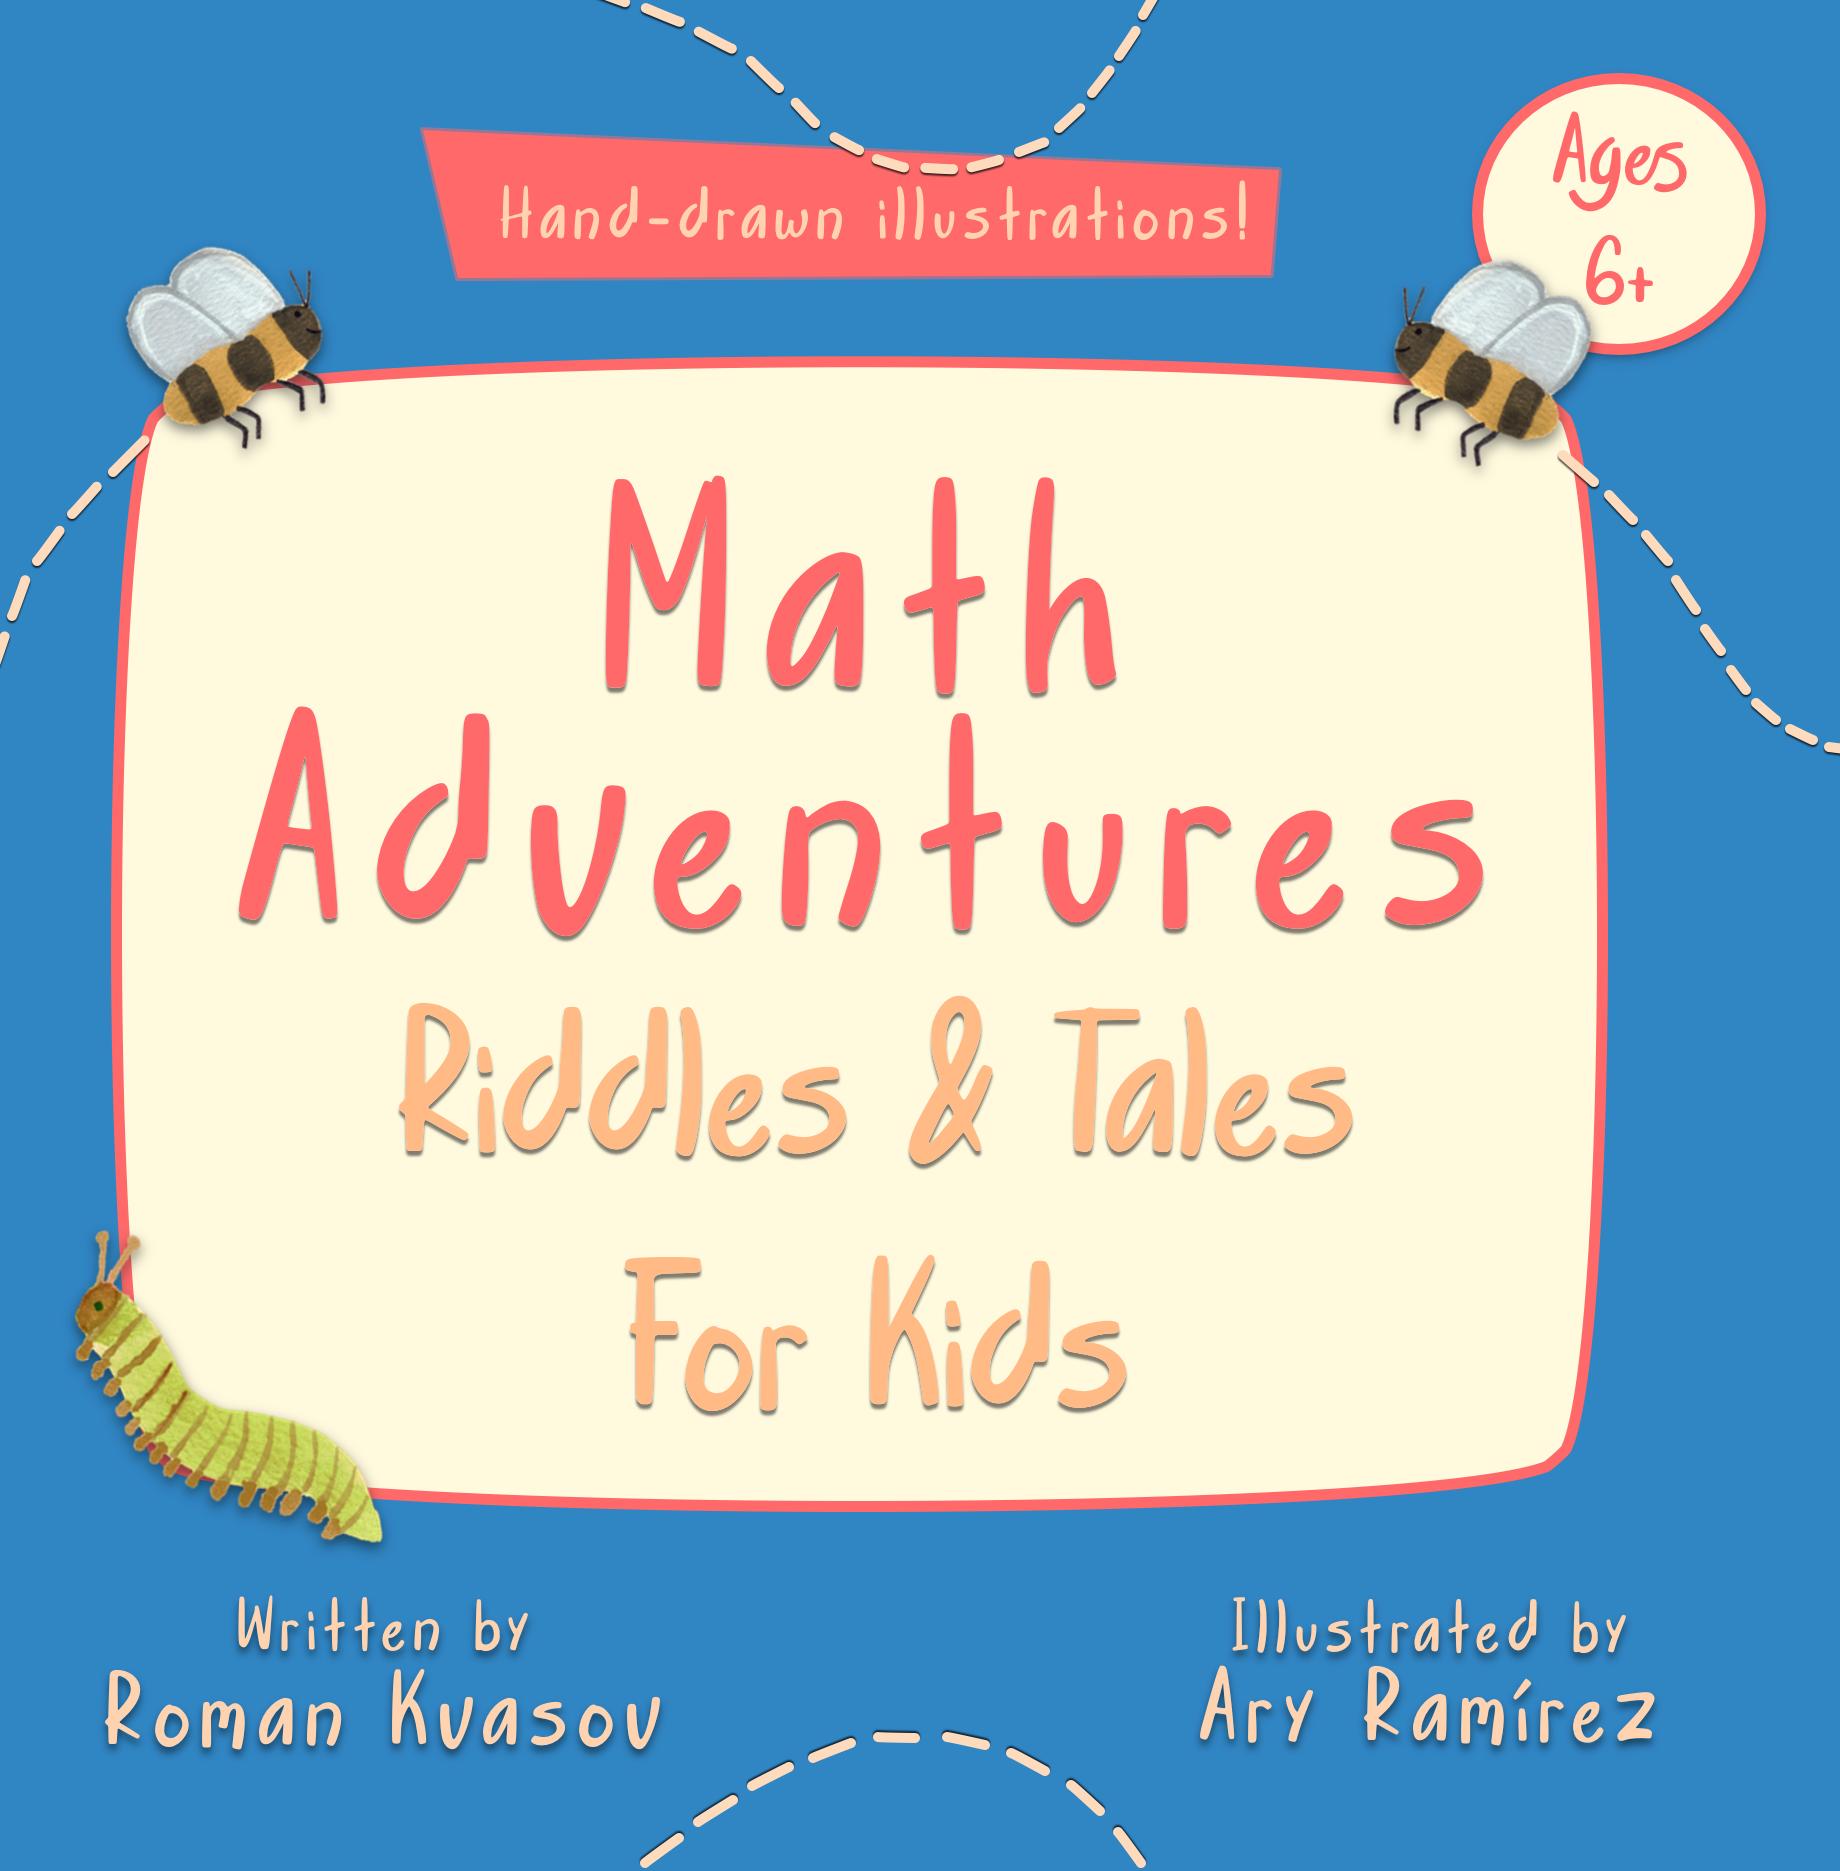 MATH ADVENTURES: RIDDLES & TALES FOR KIDS